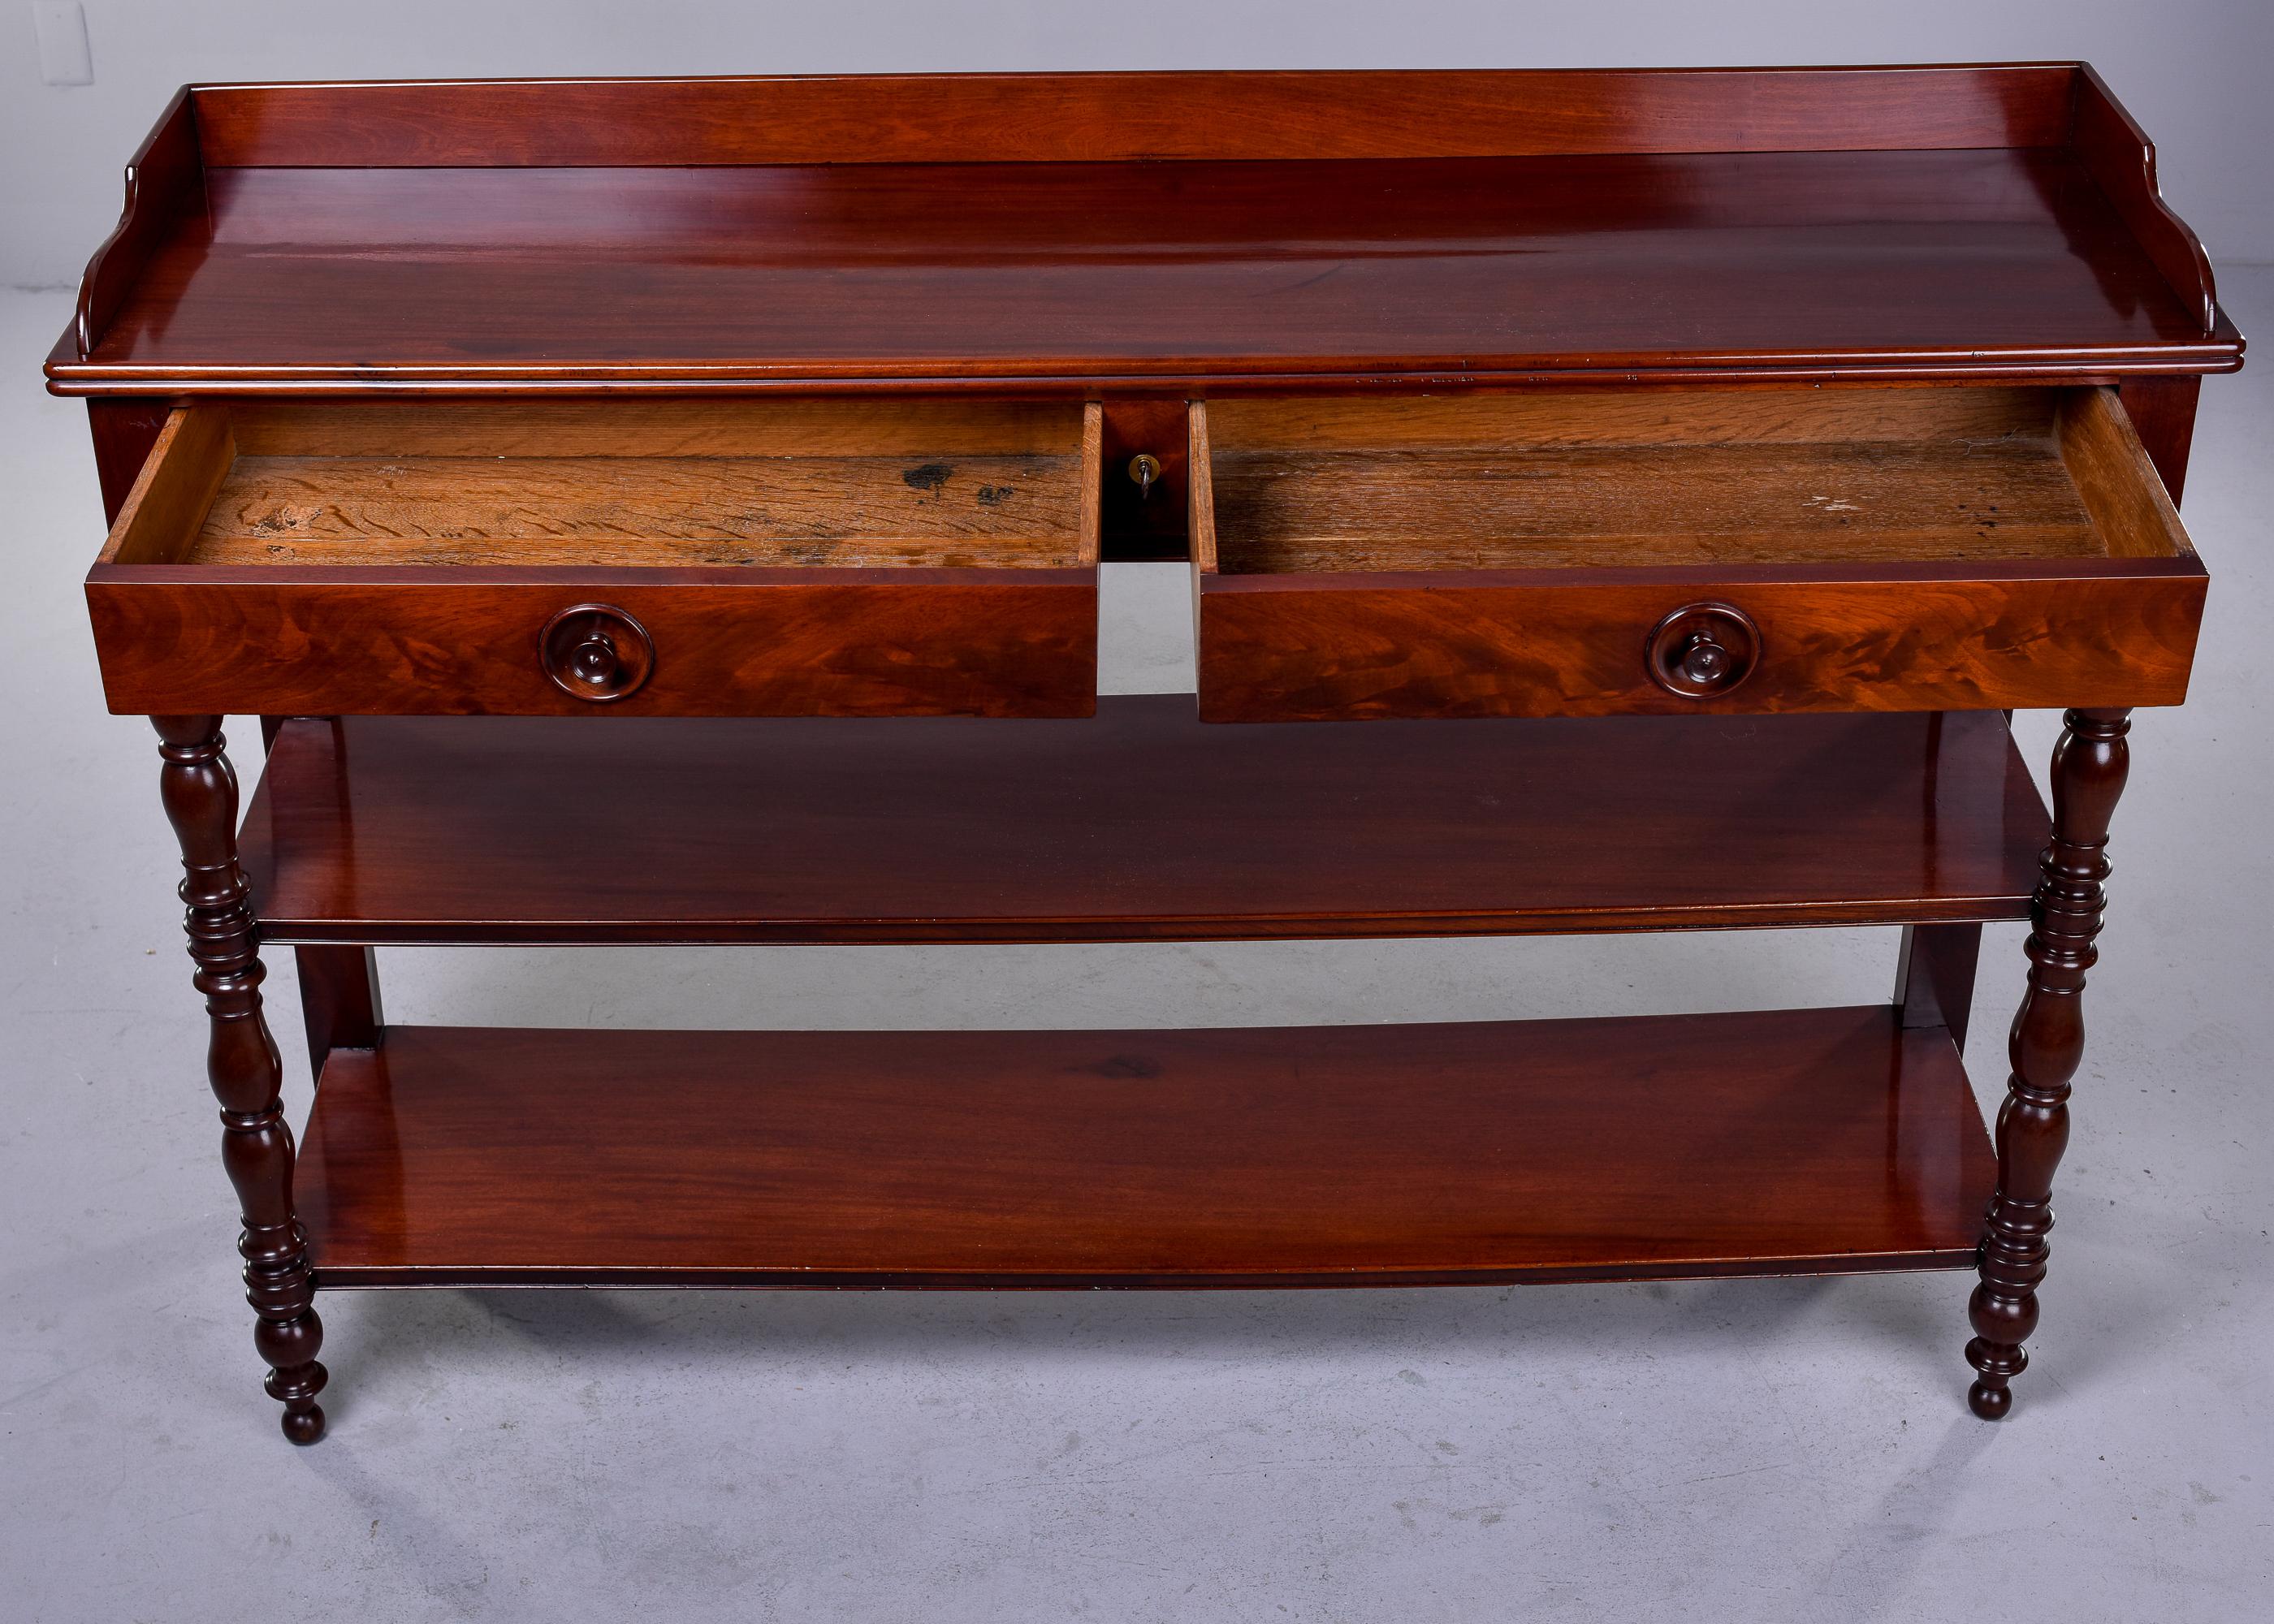 20th Century Early 20th C English Mahogany Three Tier Server with Drawers    For Sale